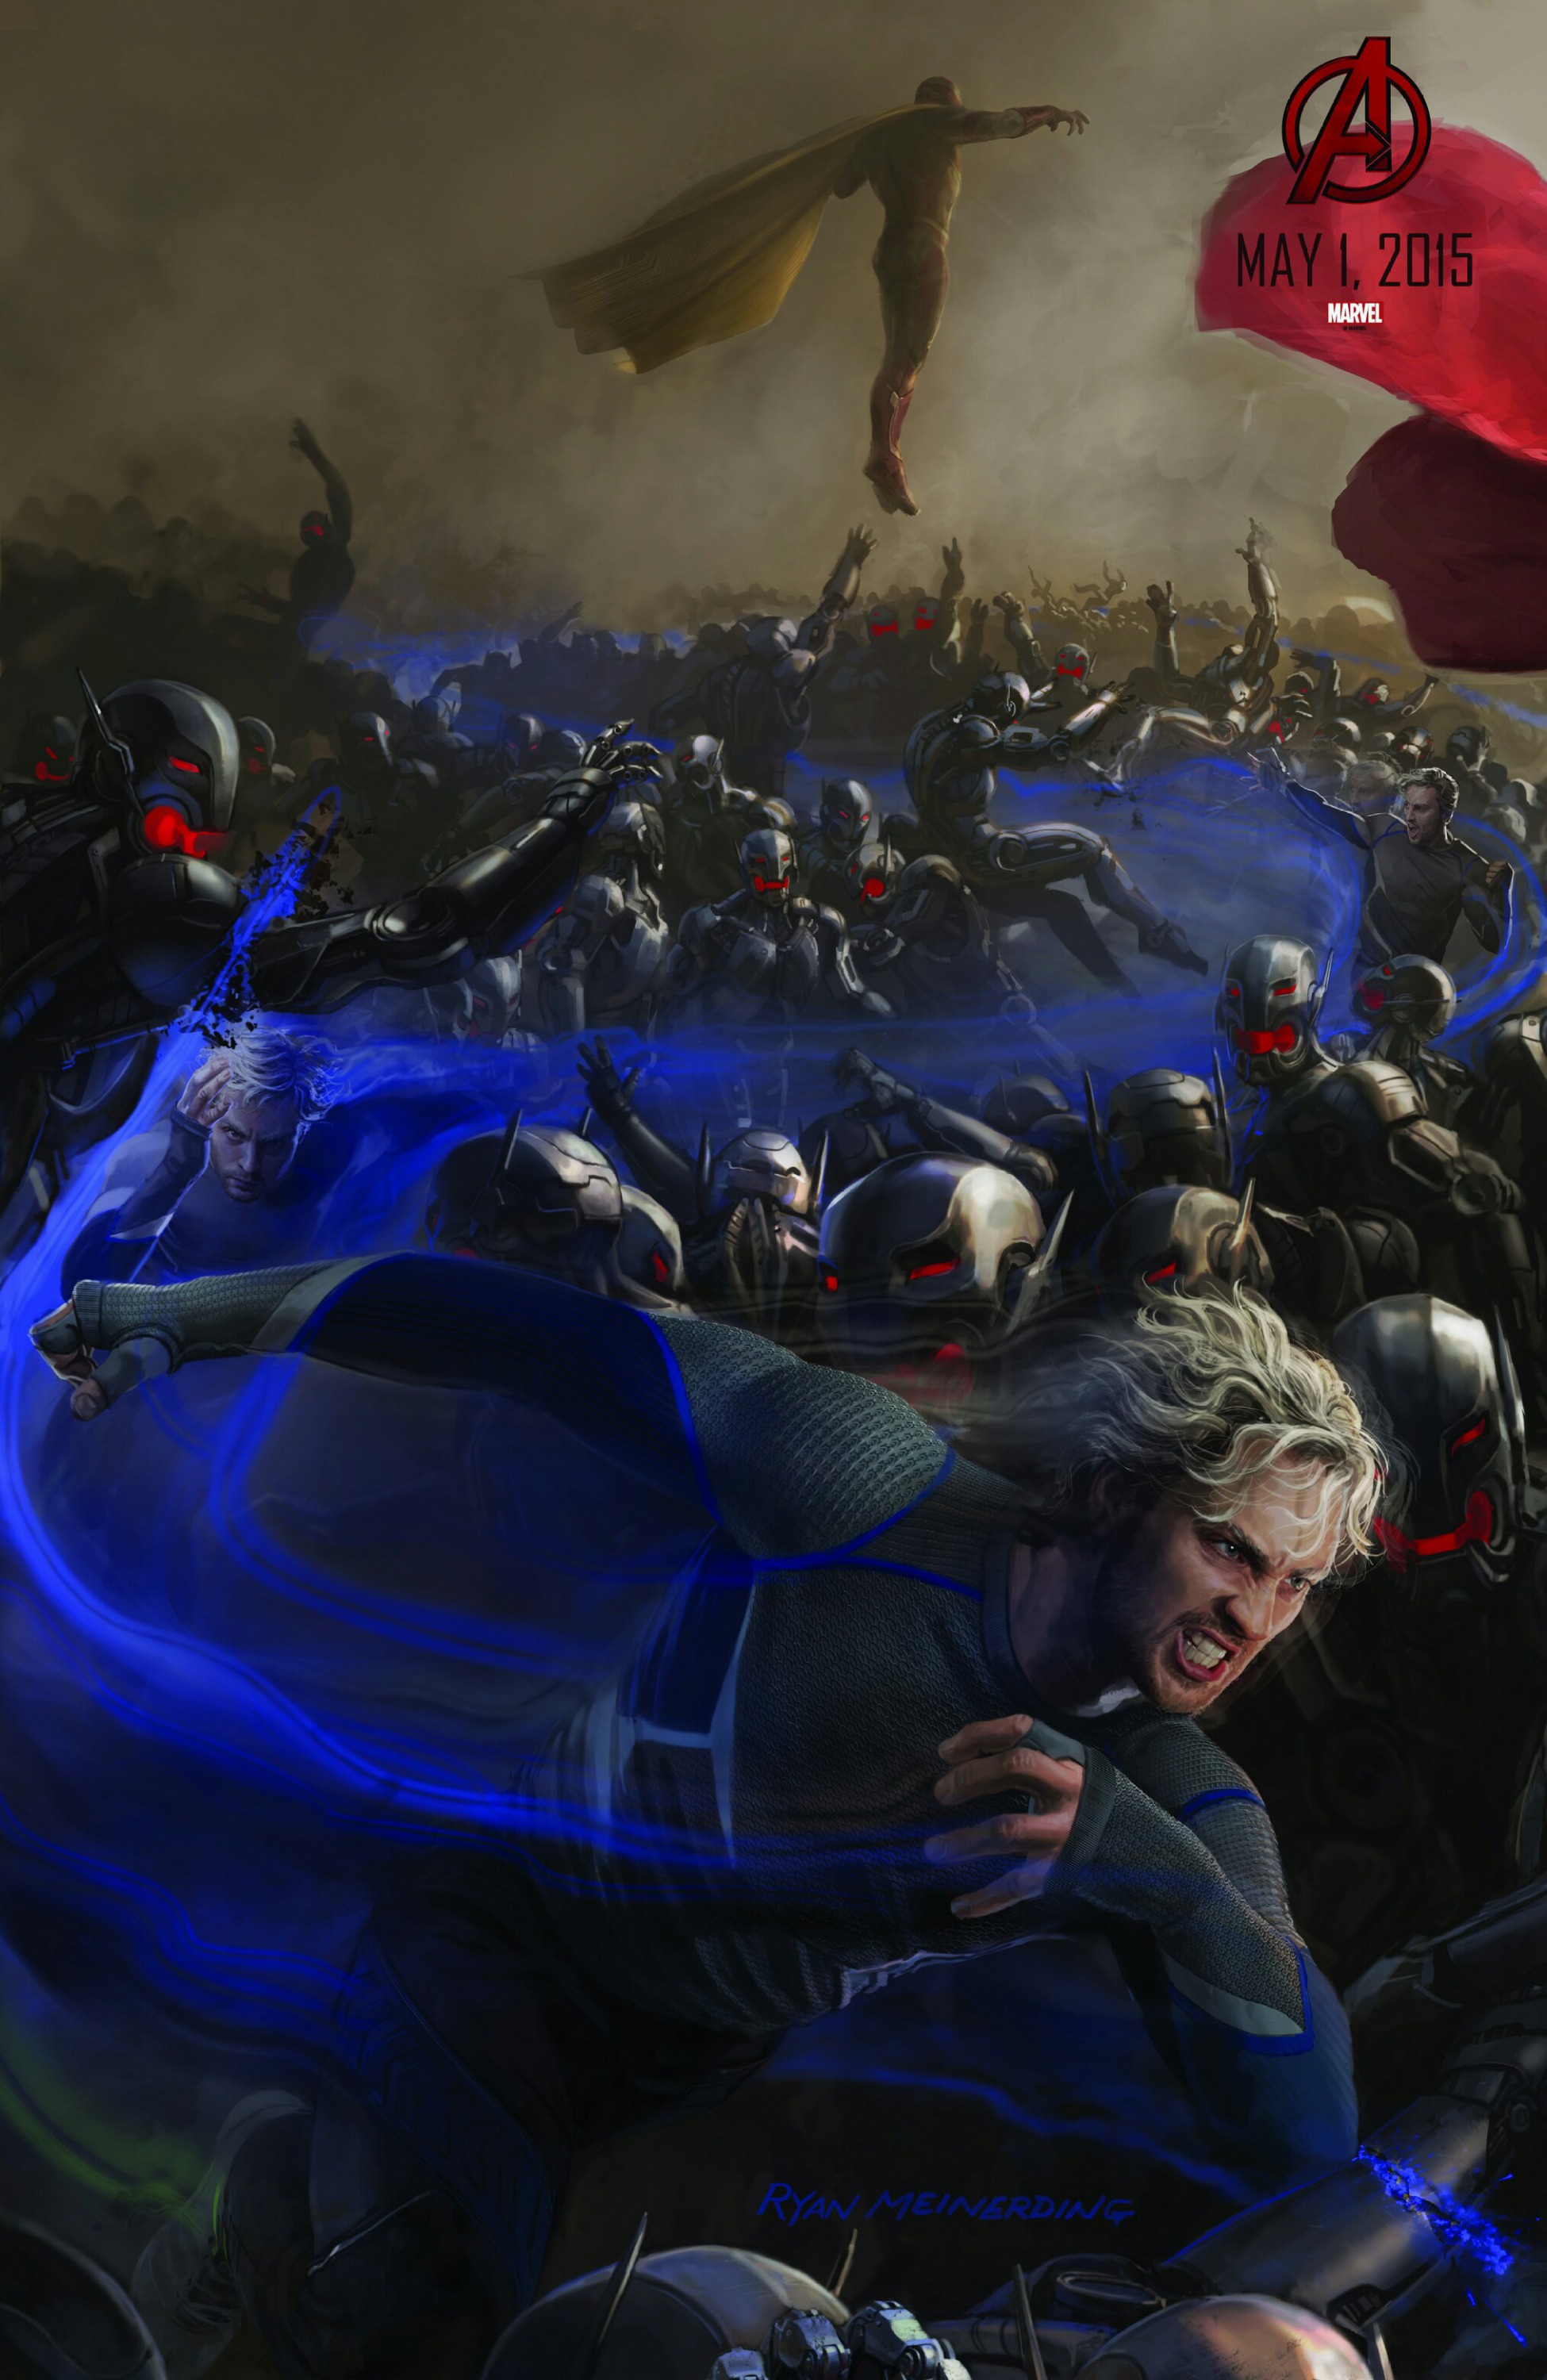 Mega Sized Movie Poster Image for Avengers: Age of Ultron (#2 of 36)